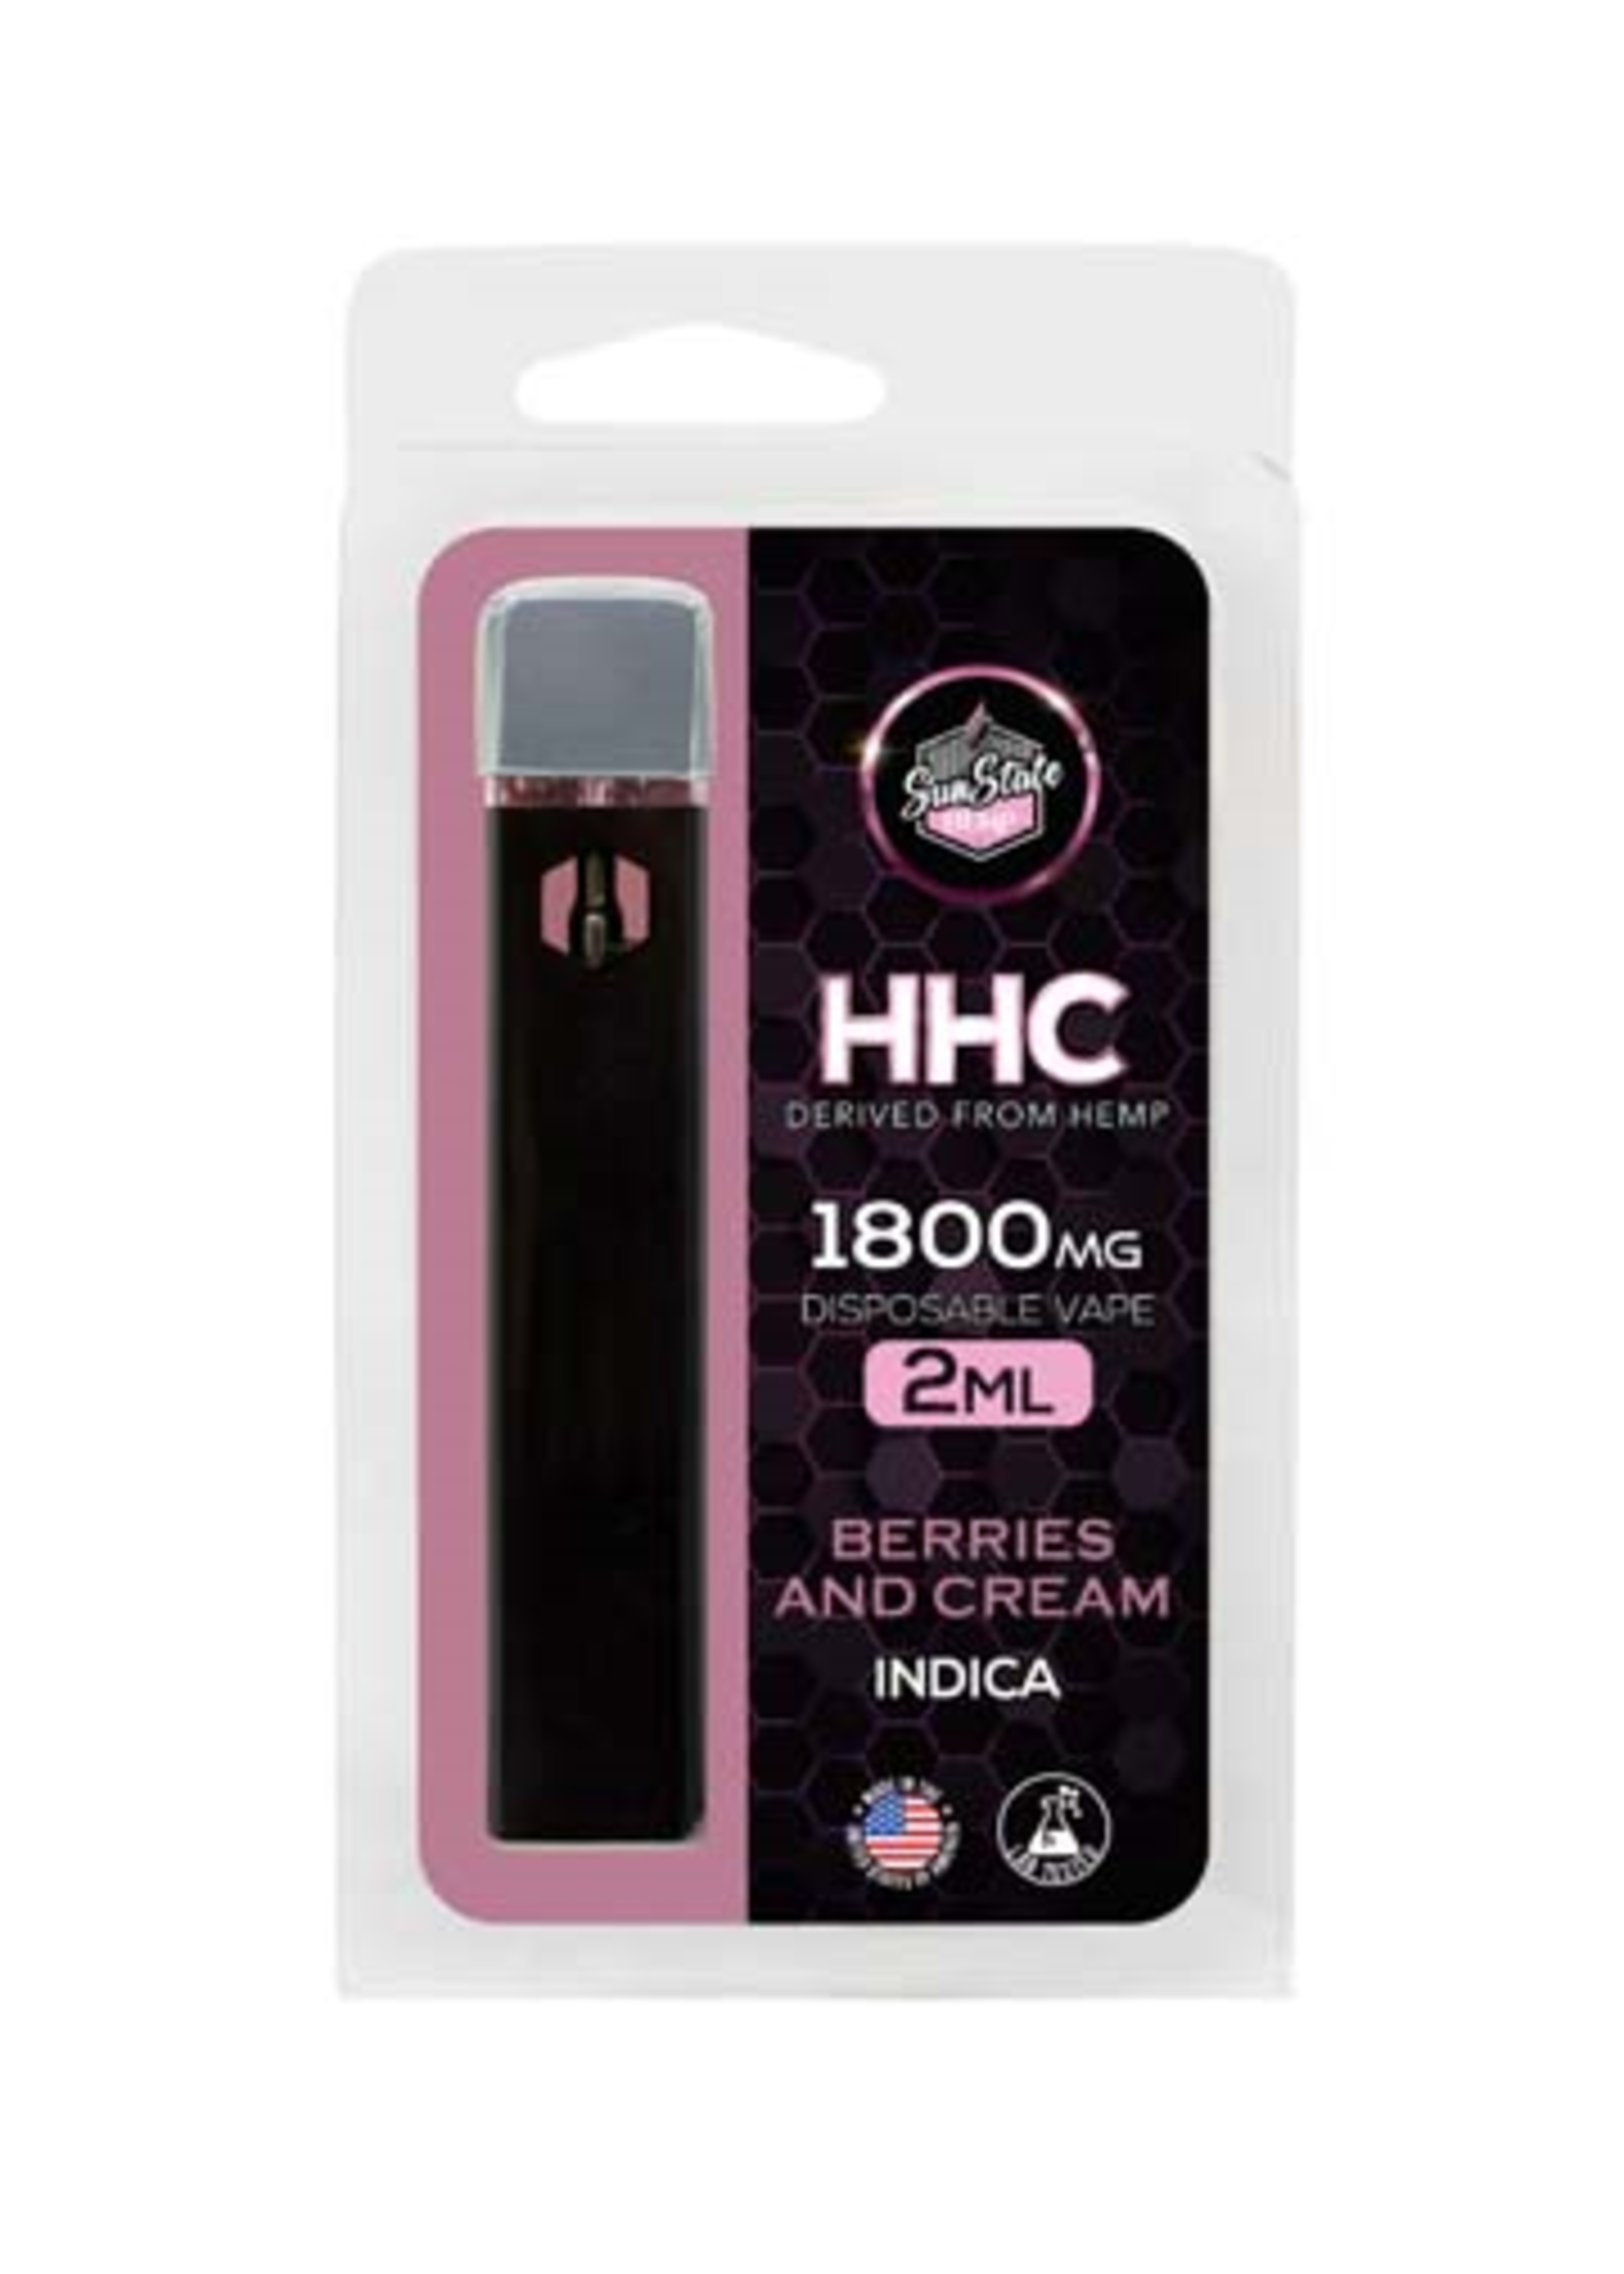 SUNSTATE SUNSTATE HHC DISPOSABLE BERRIES AND CREAM INDICA